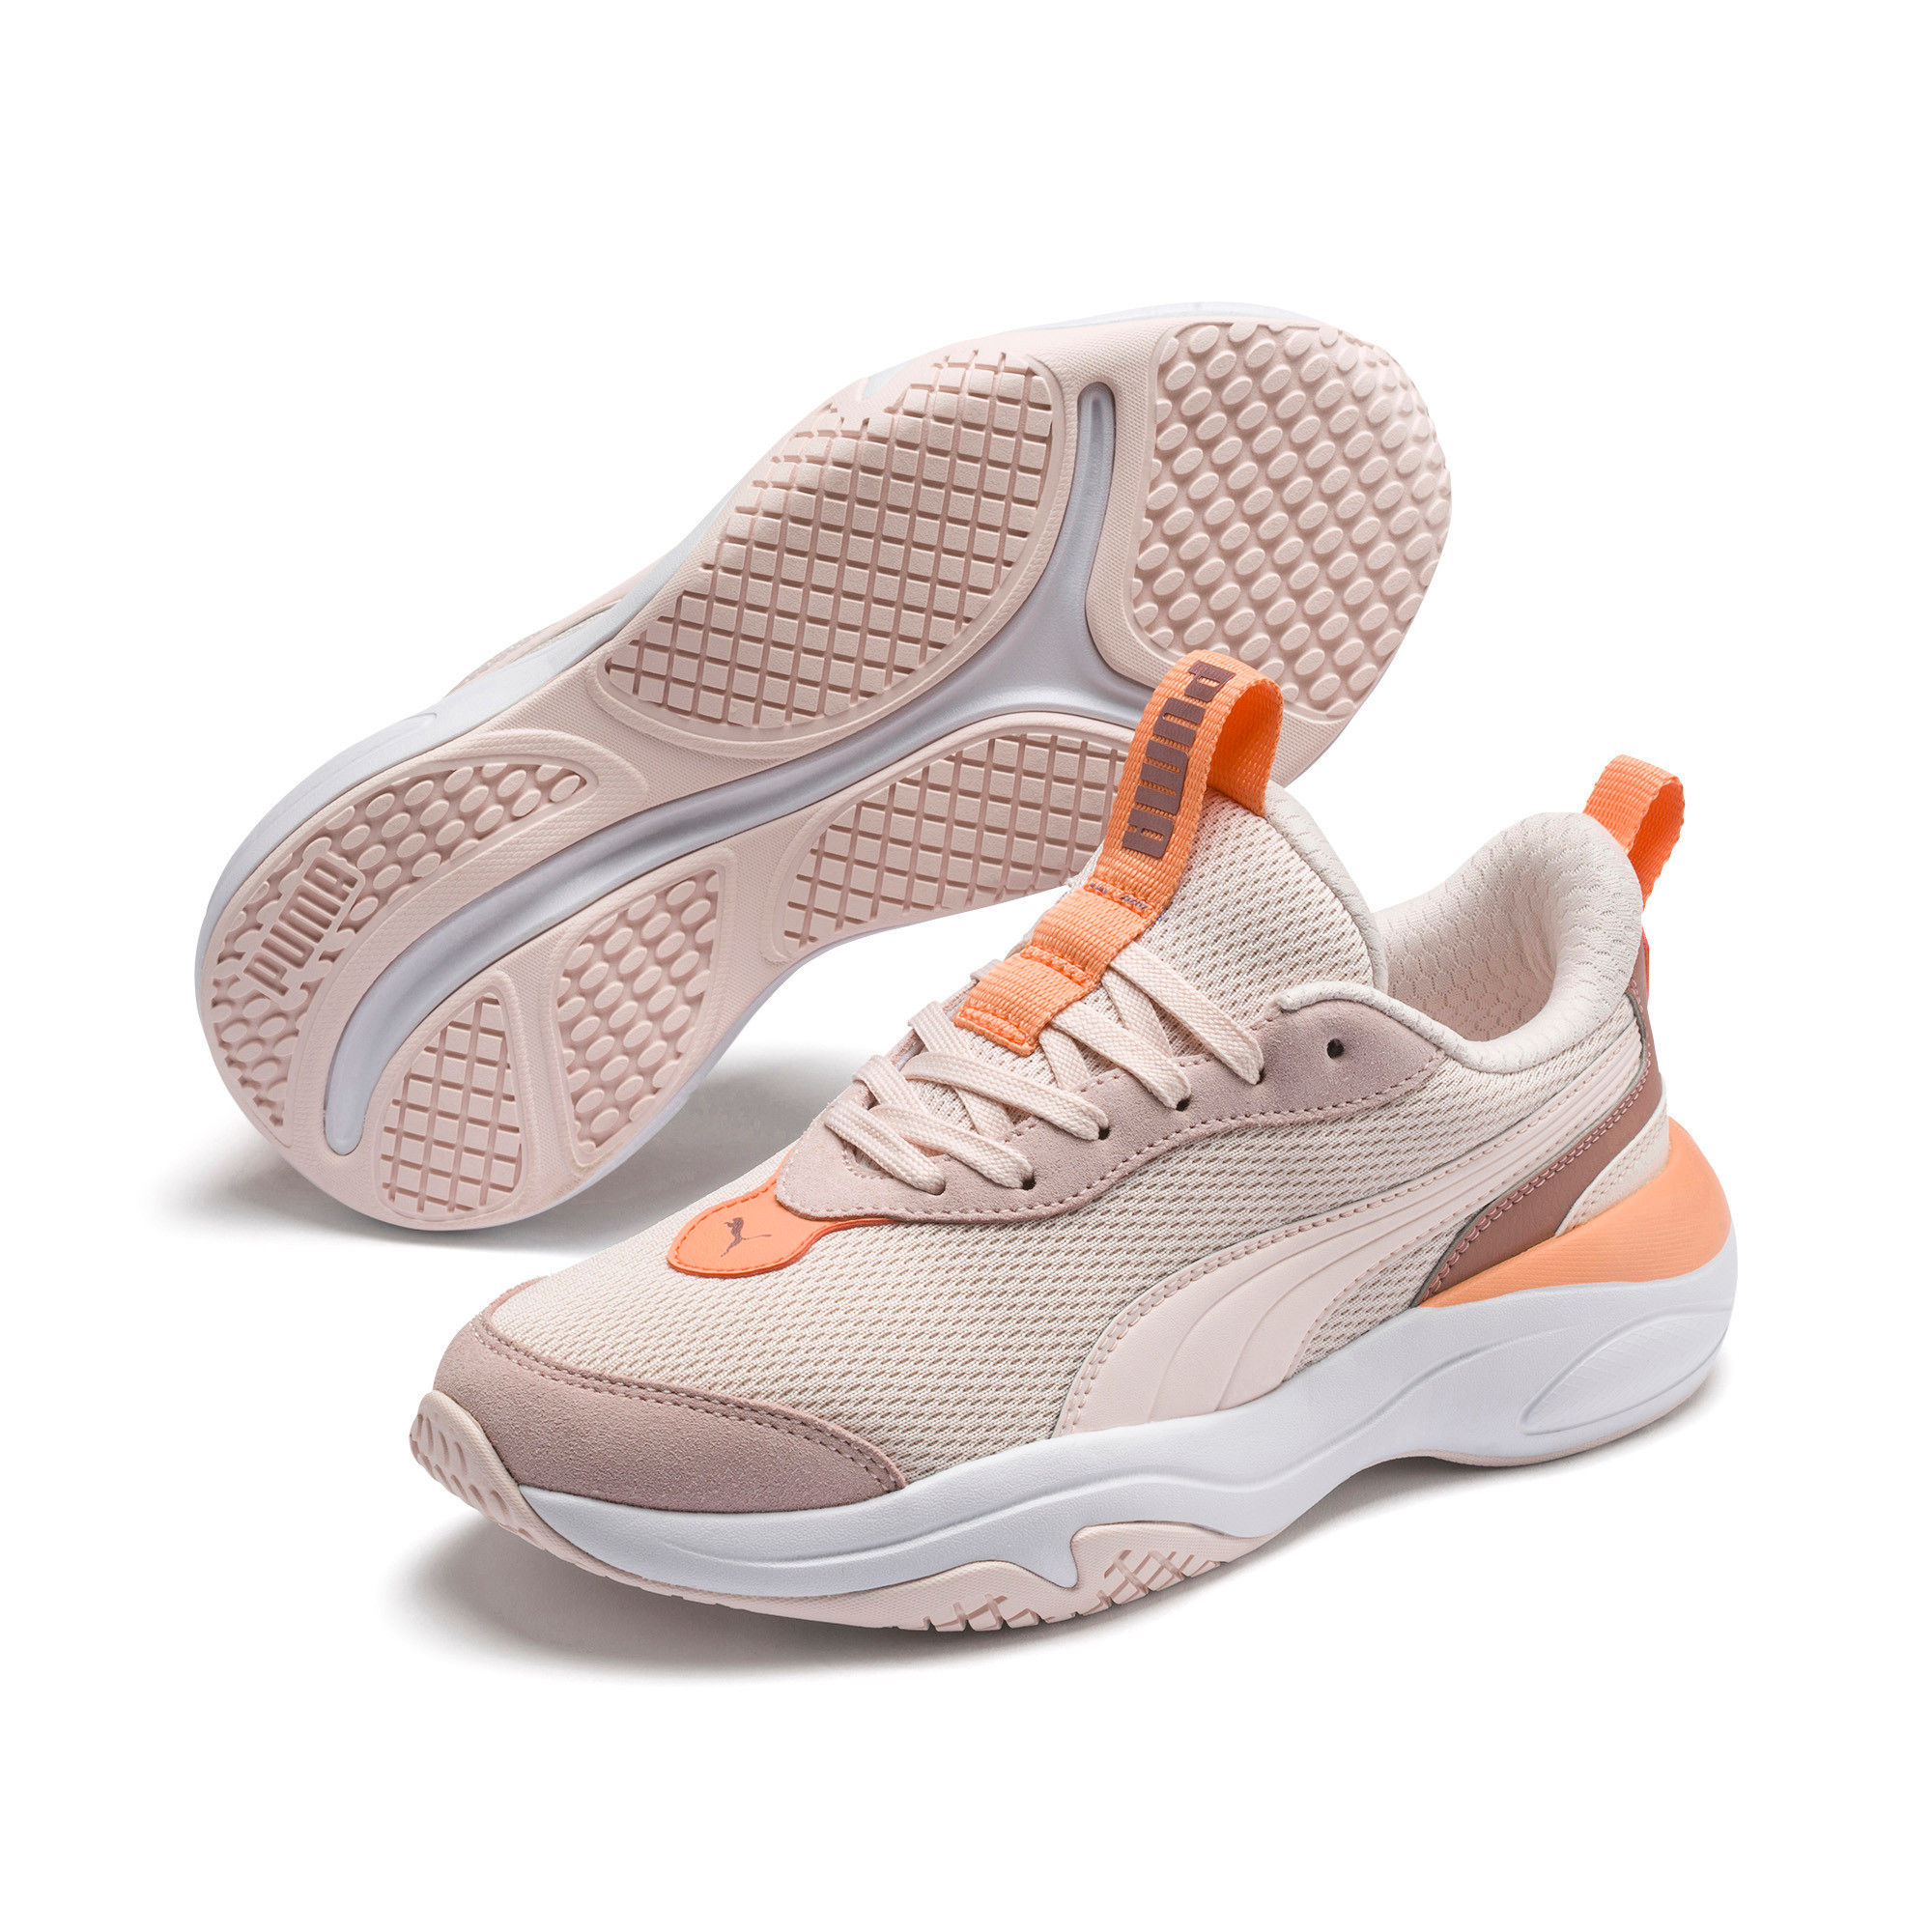 Puma VAL Shoes - Pink (10): Buy Puma VAL Shoes - Pink (10) Online at ...